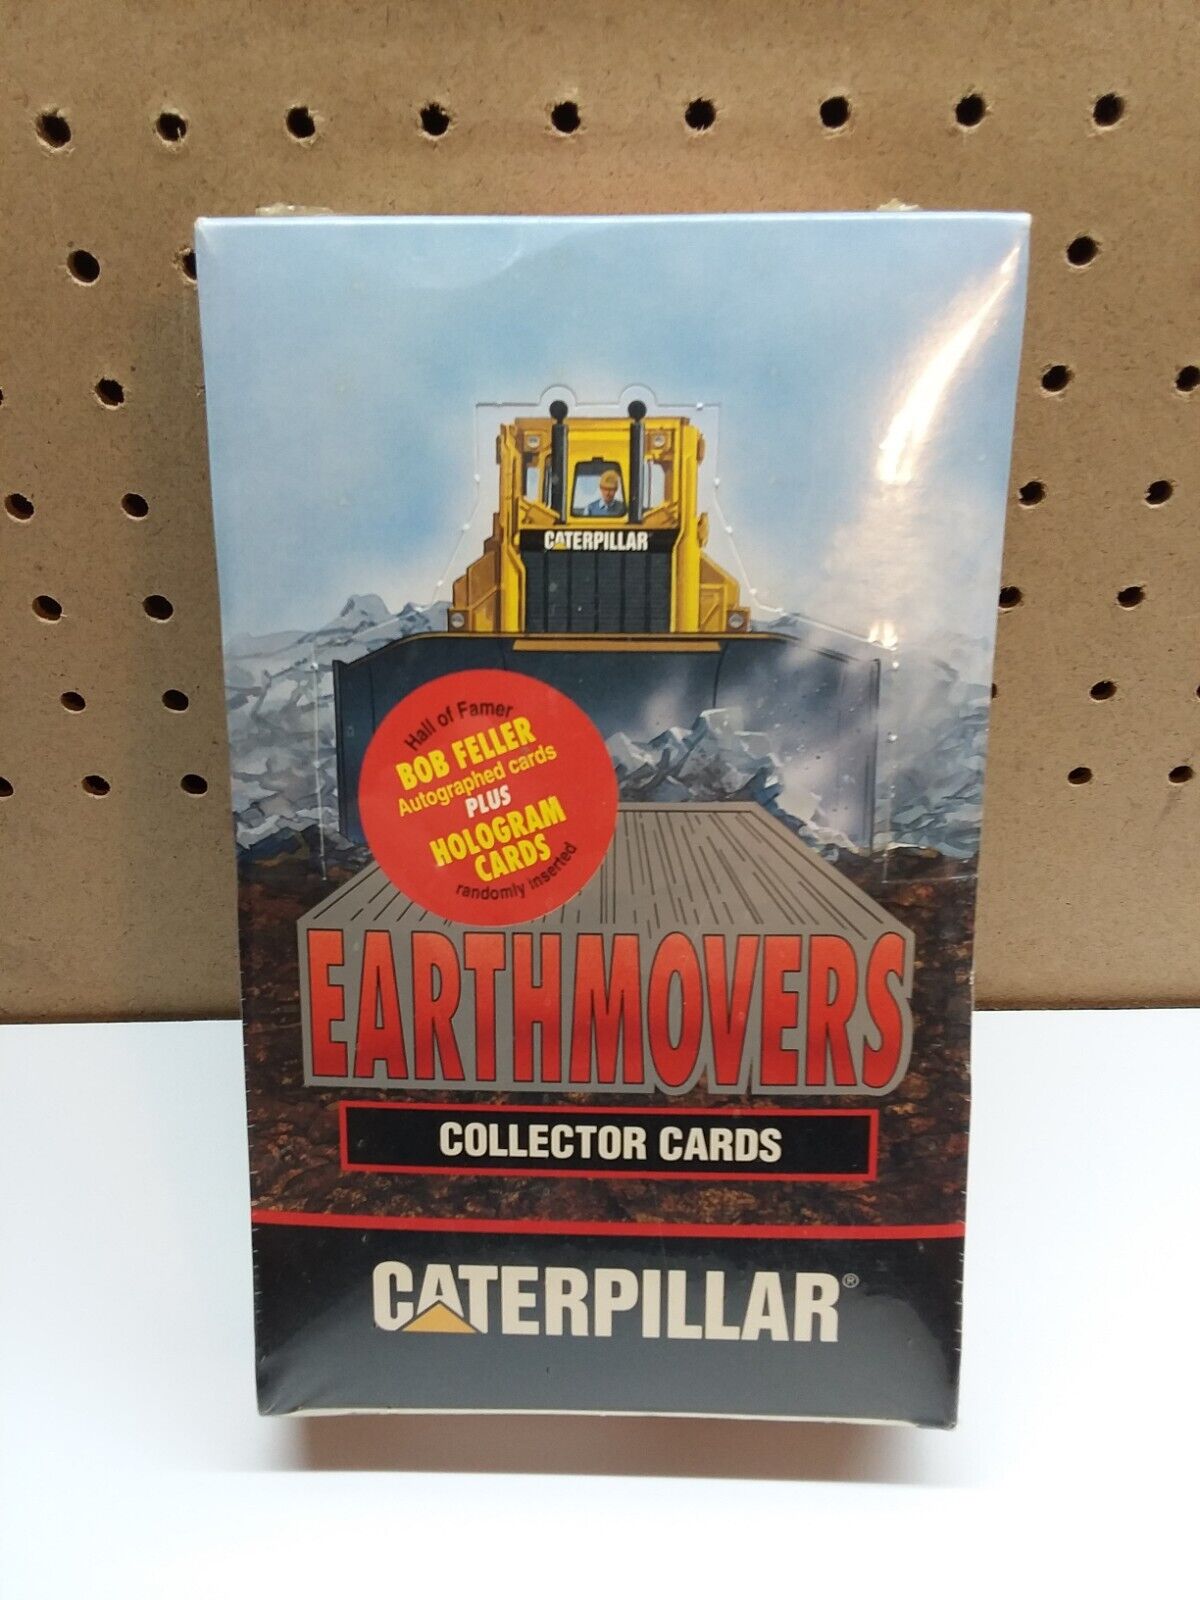 1993 Caterpillar Earthmovers Collector Cards Sealed Box 36 Packs Series 1